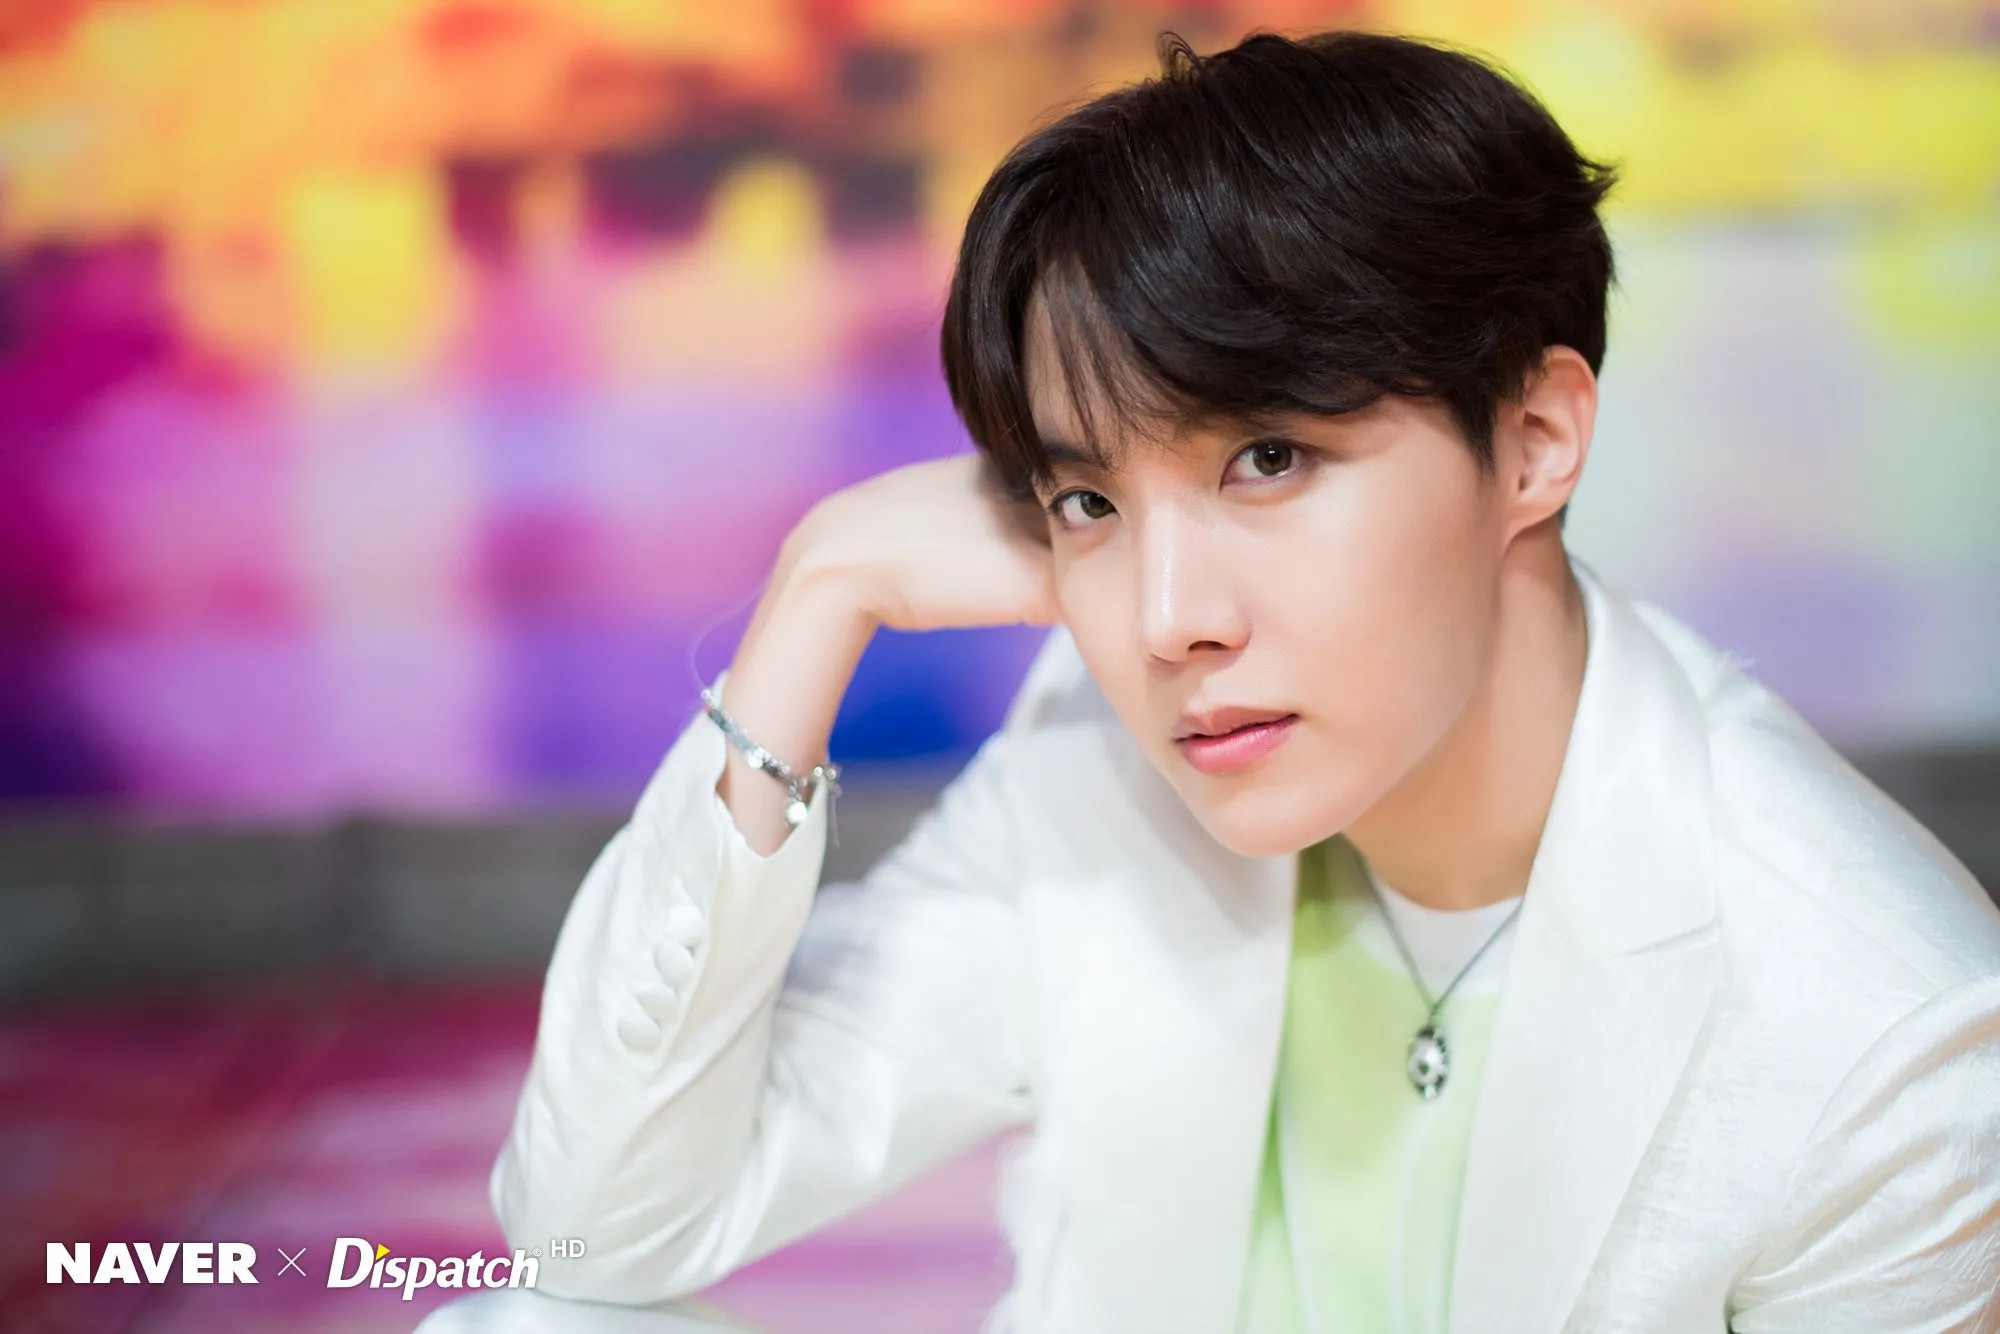 BTS' J-Hope 'Boy With Luv' Music Video Filming by Naver x Dispatch 